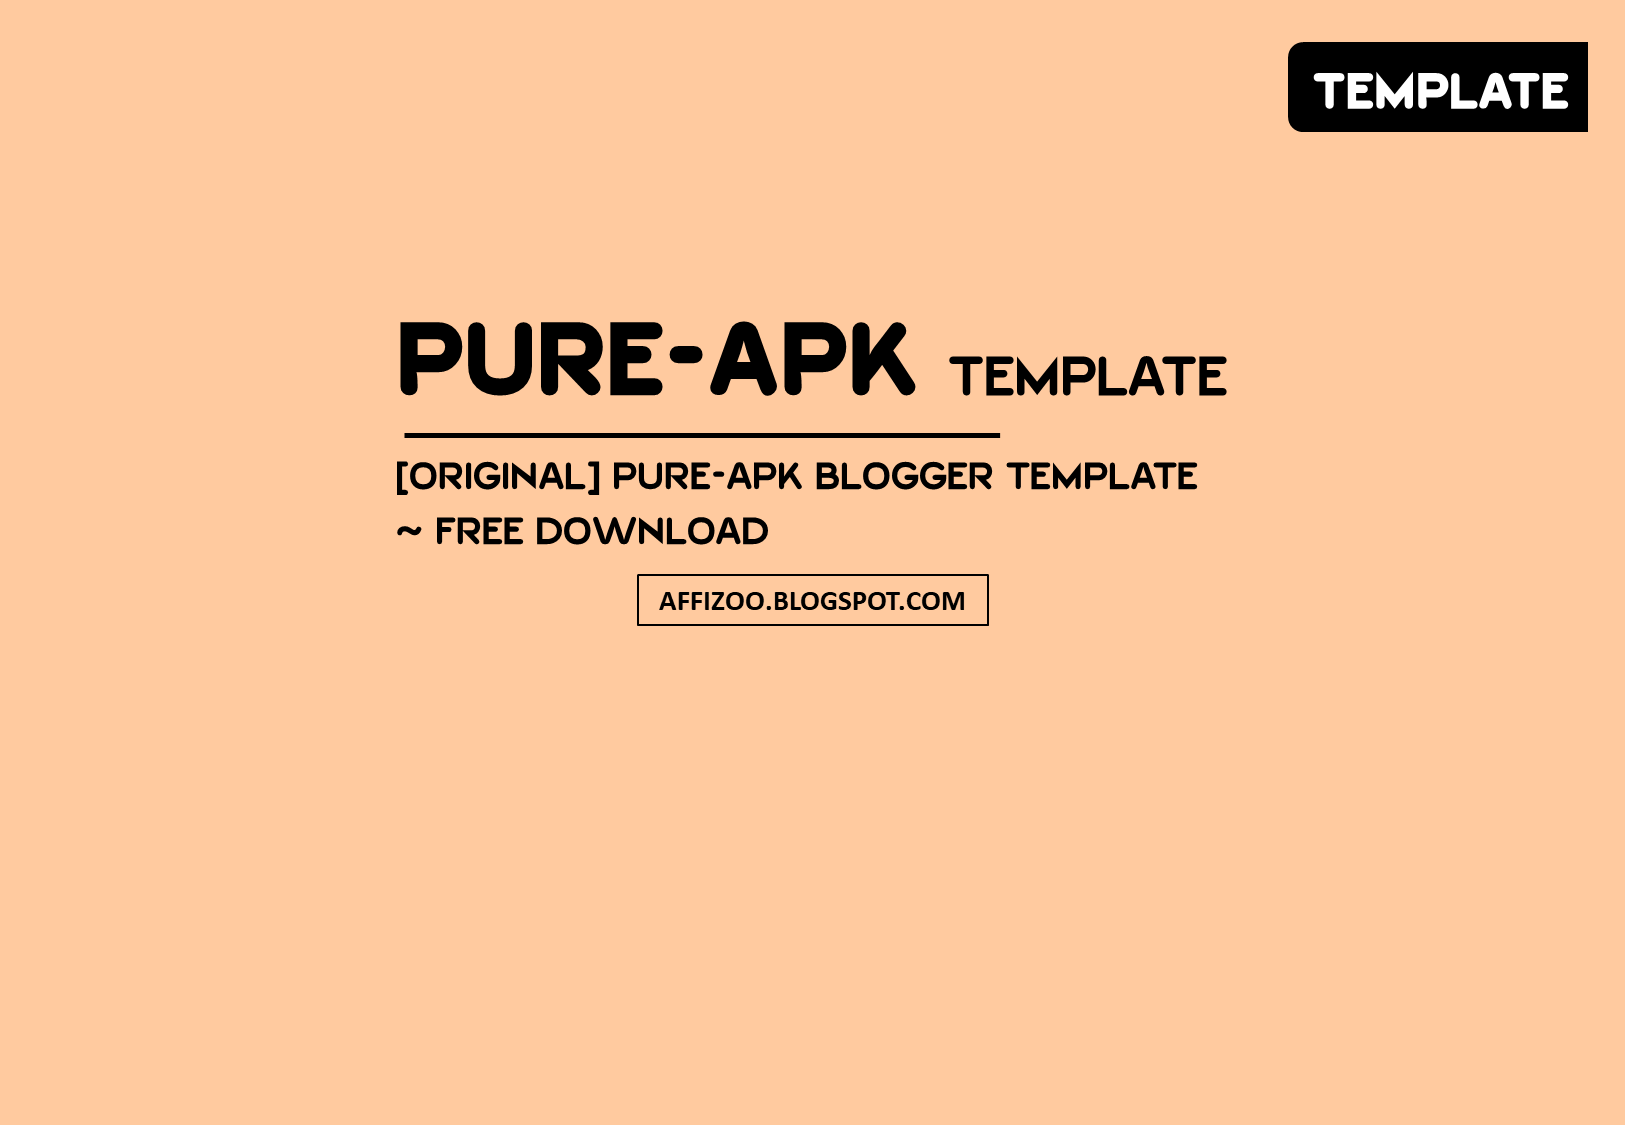 PureApk Premium Blogger Template [Play Store Template] ~ Free Download